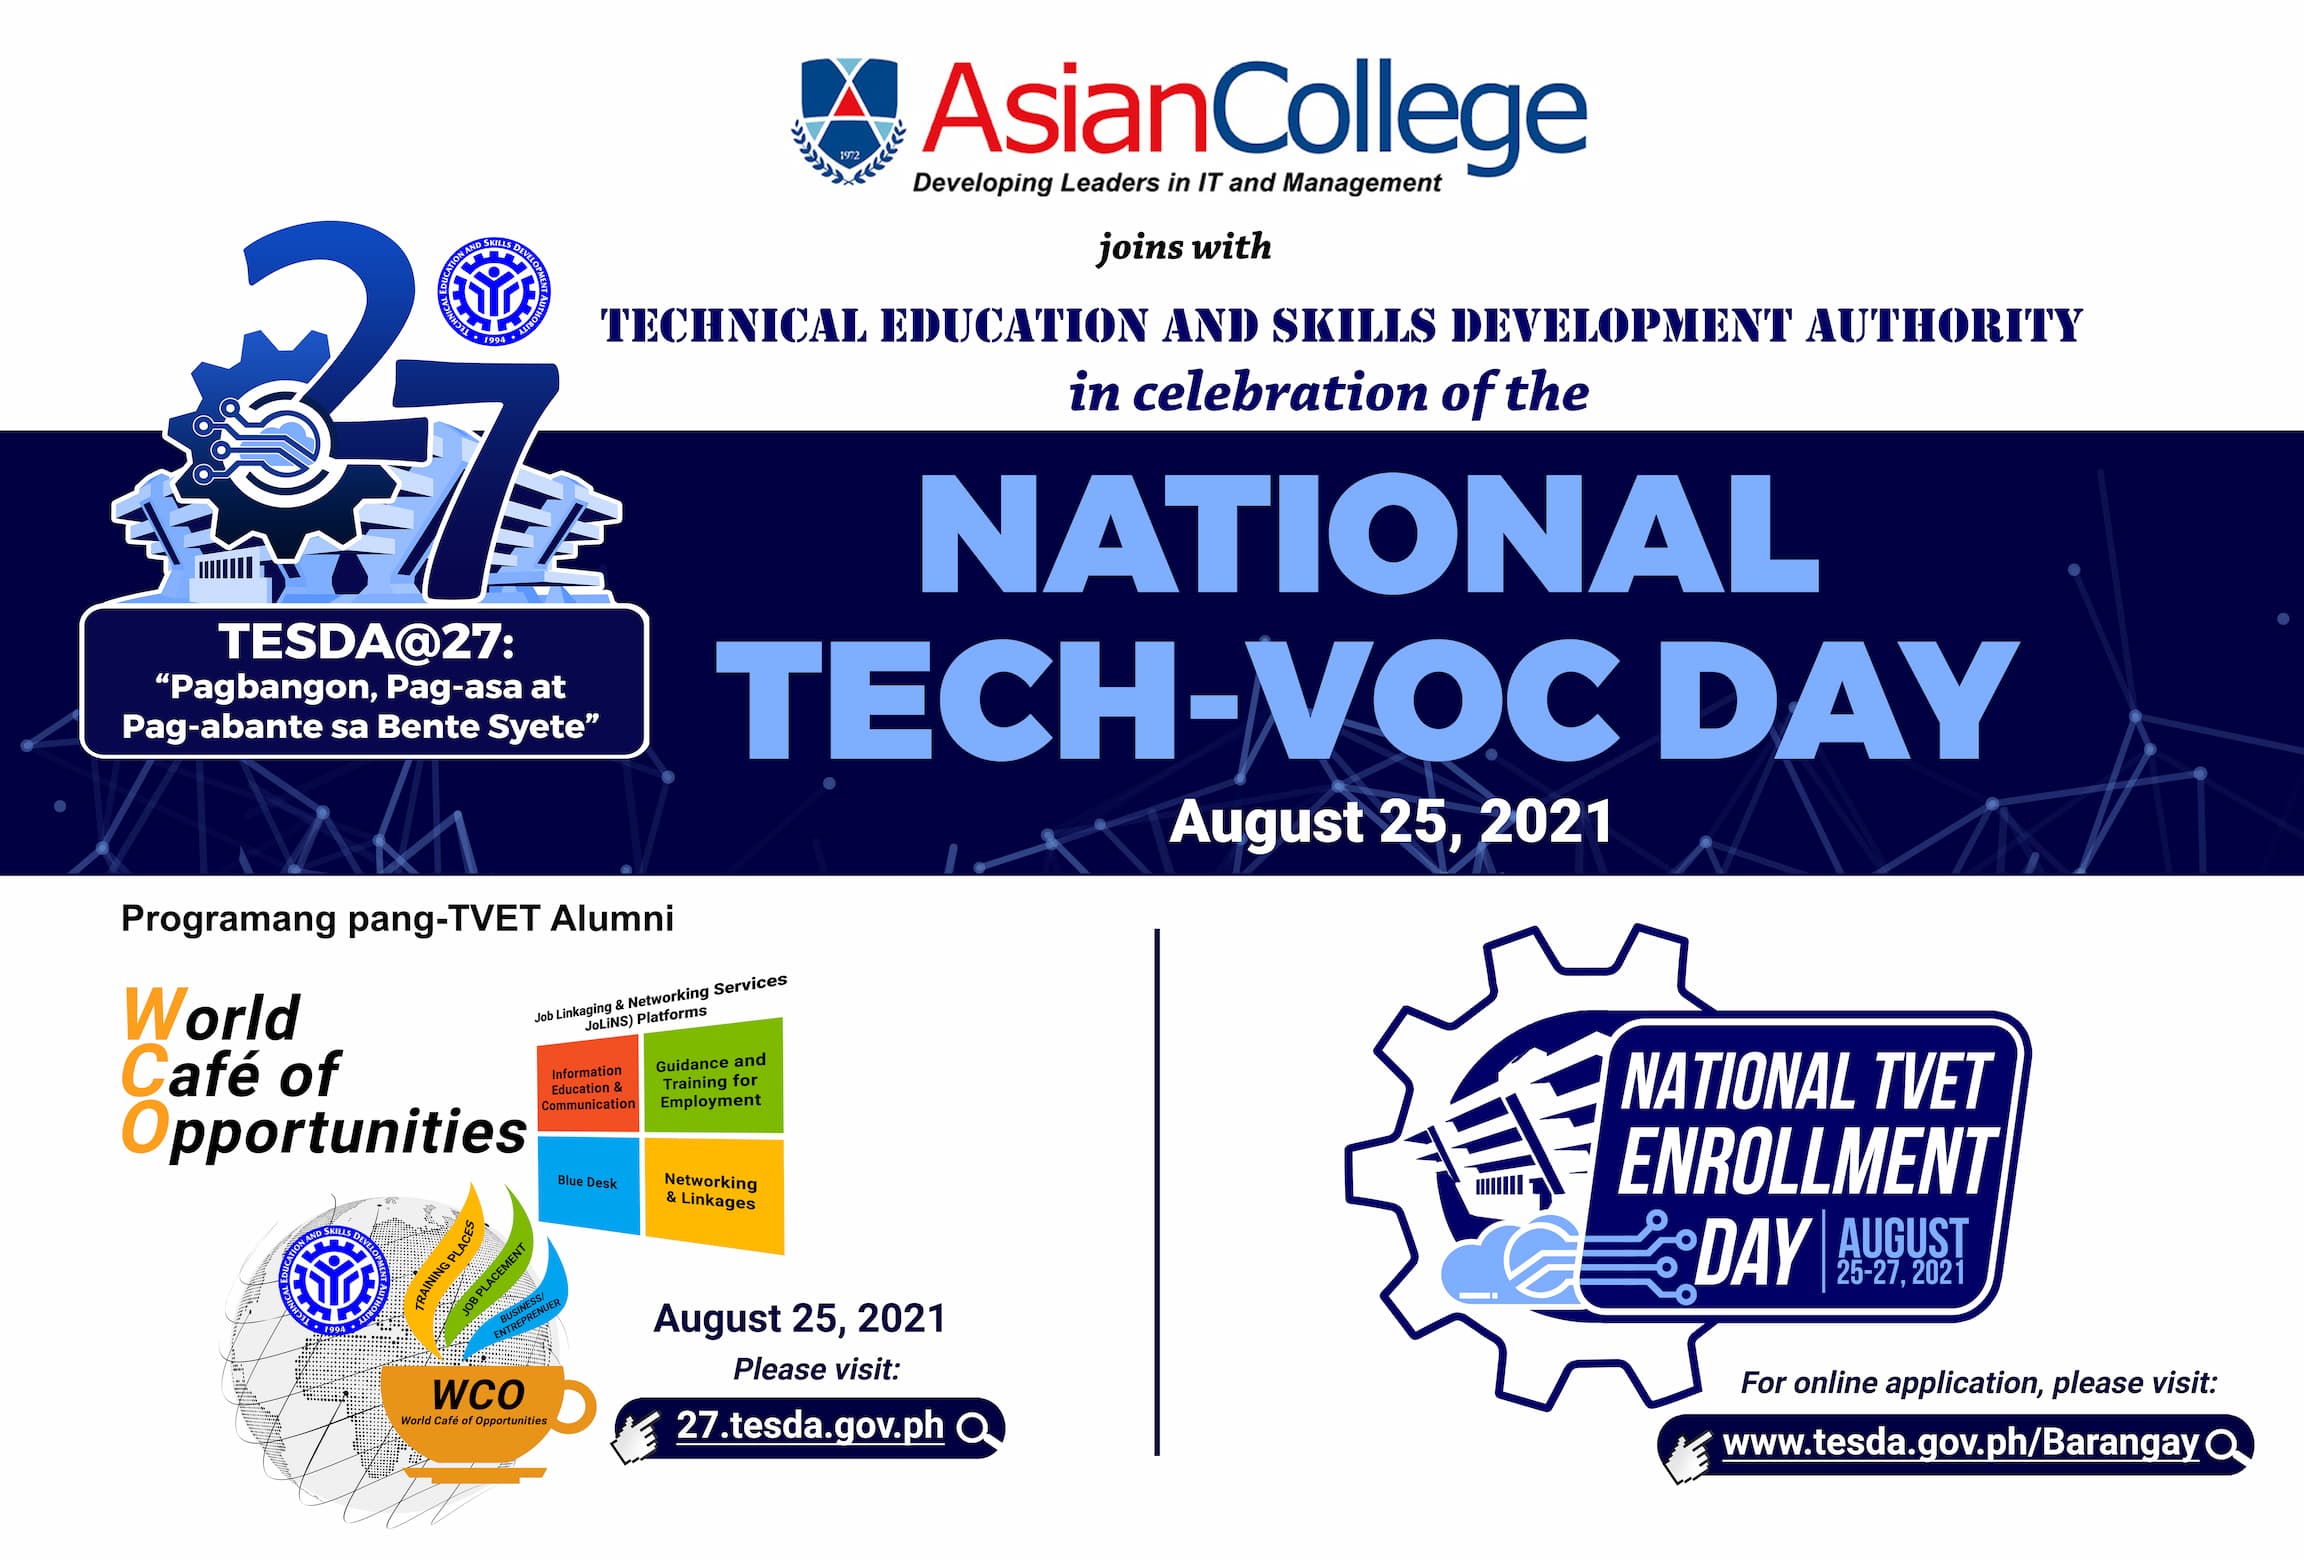 Asian College joins with TESDA in celebration of the National Tech-Voc Day